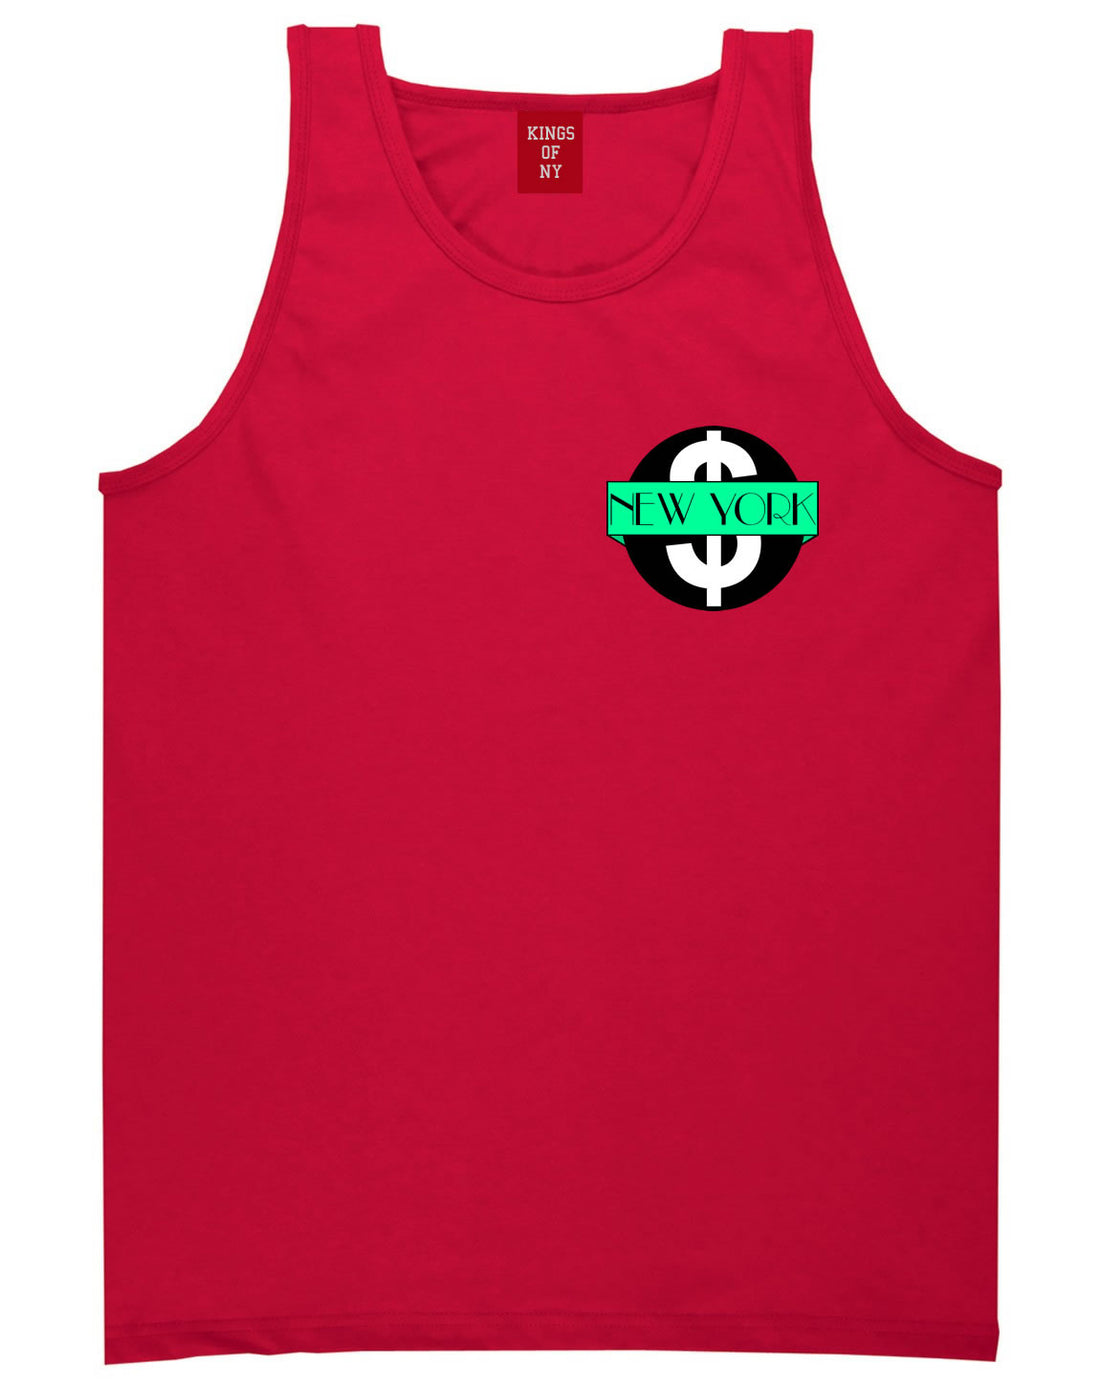 New York Mint Chest Logo Tank Top in Red By Kings Of NY